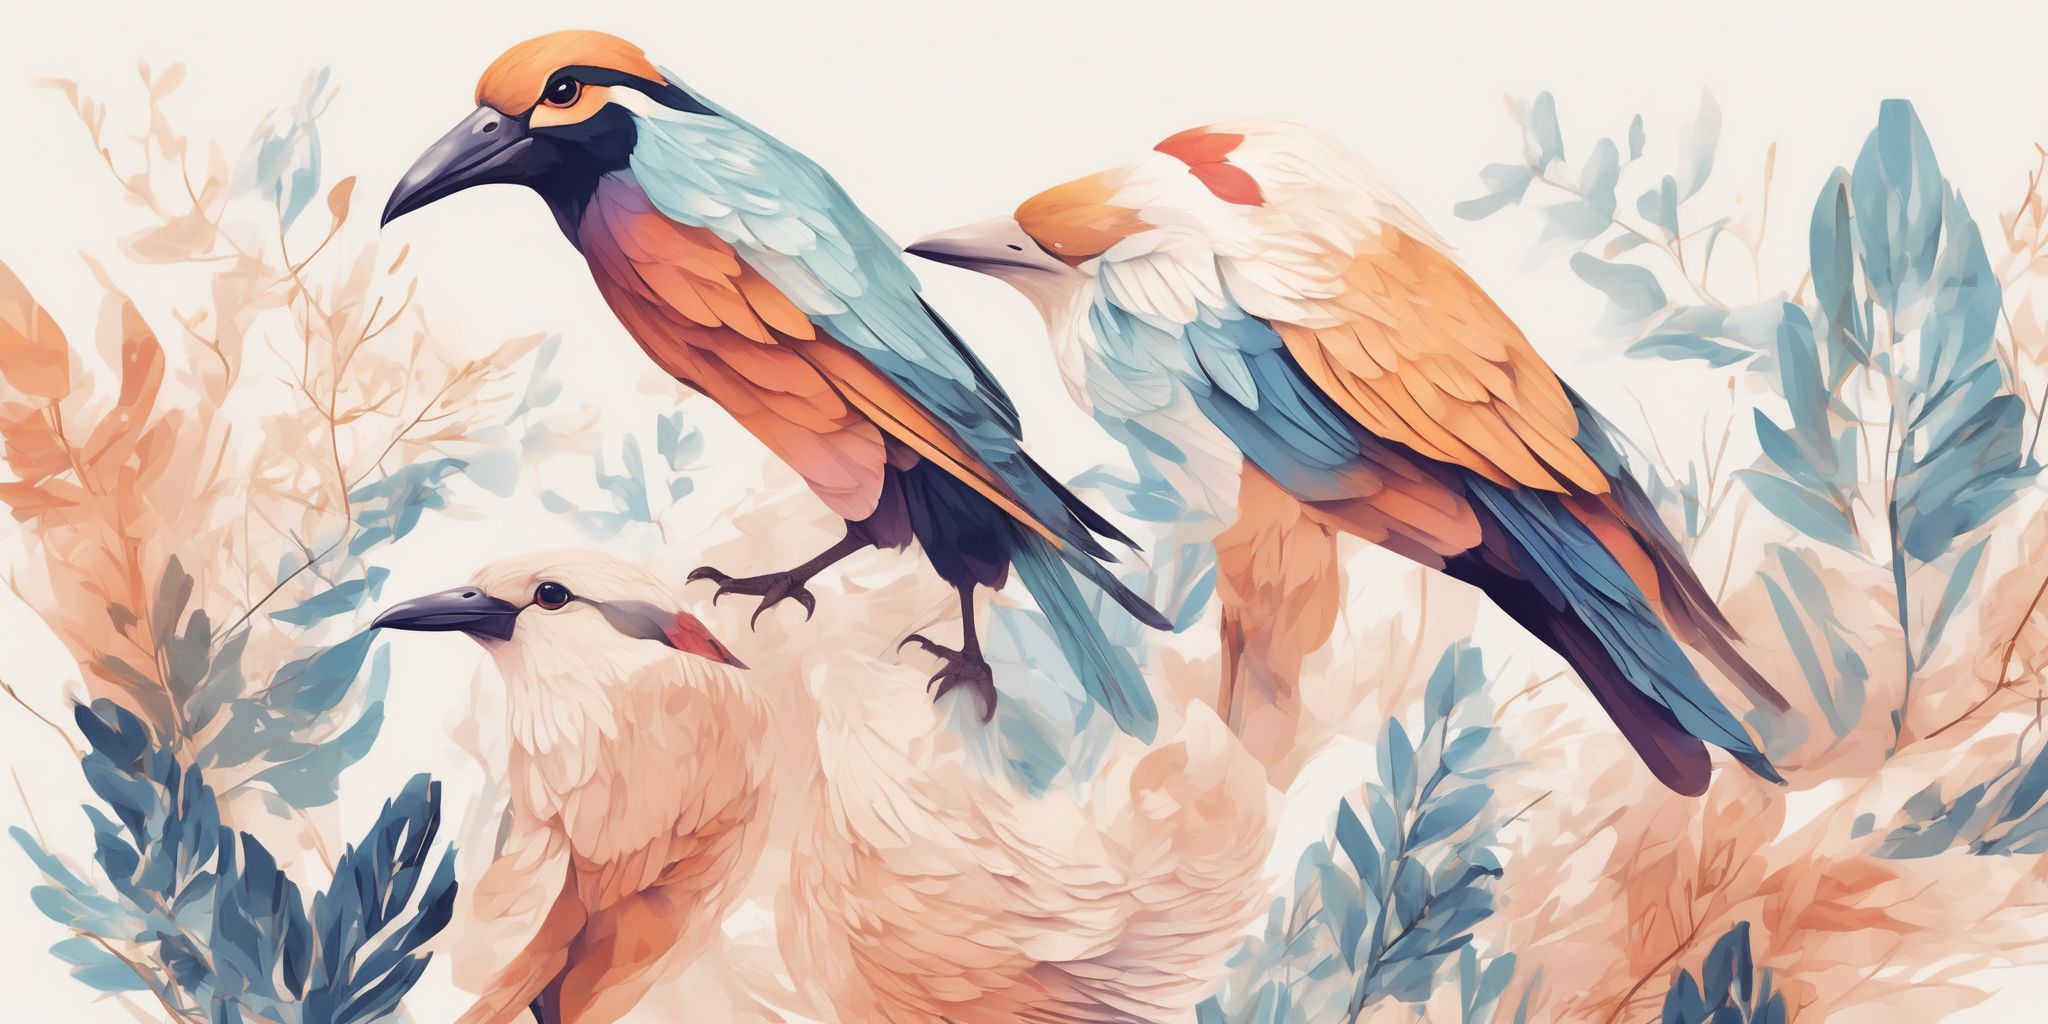 Avian branding in illustration style with gradients and white background